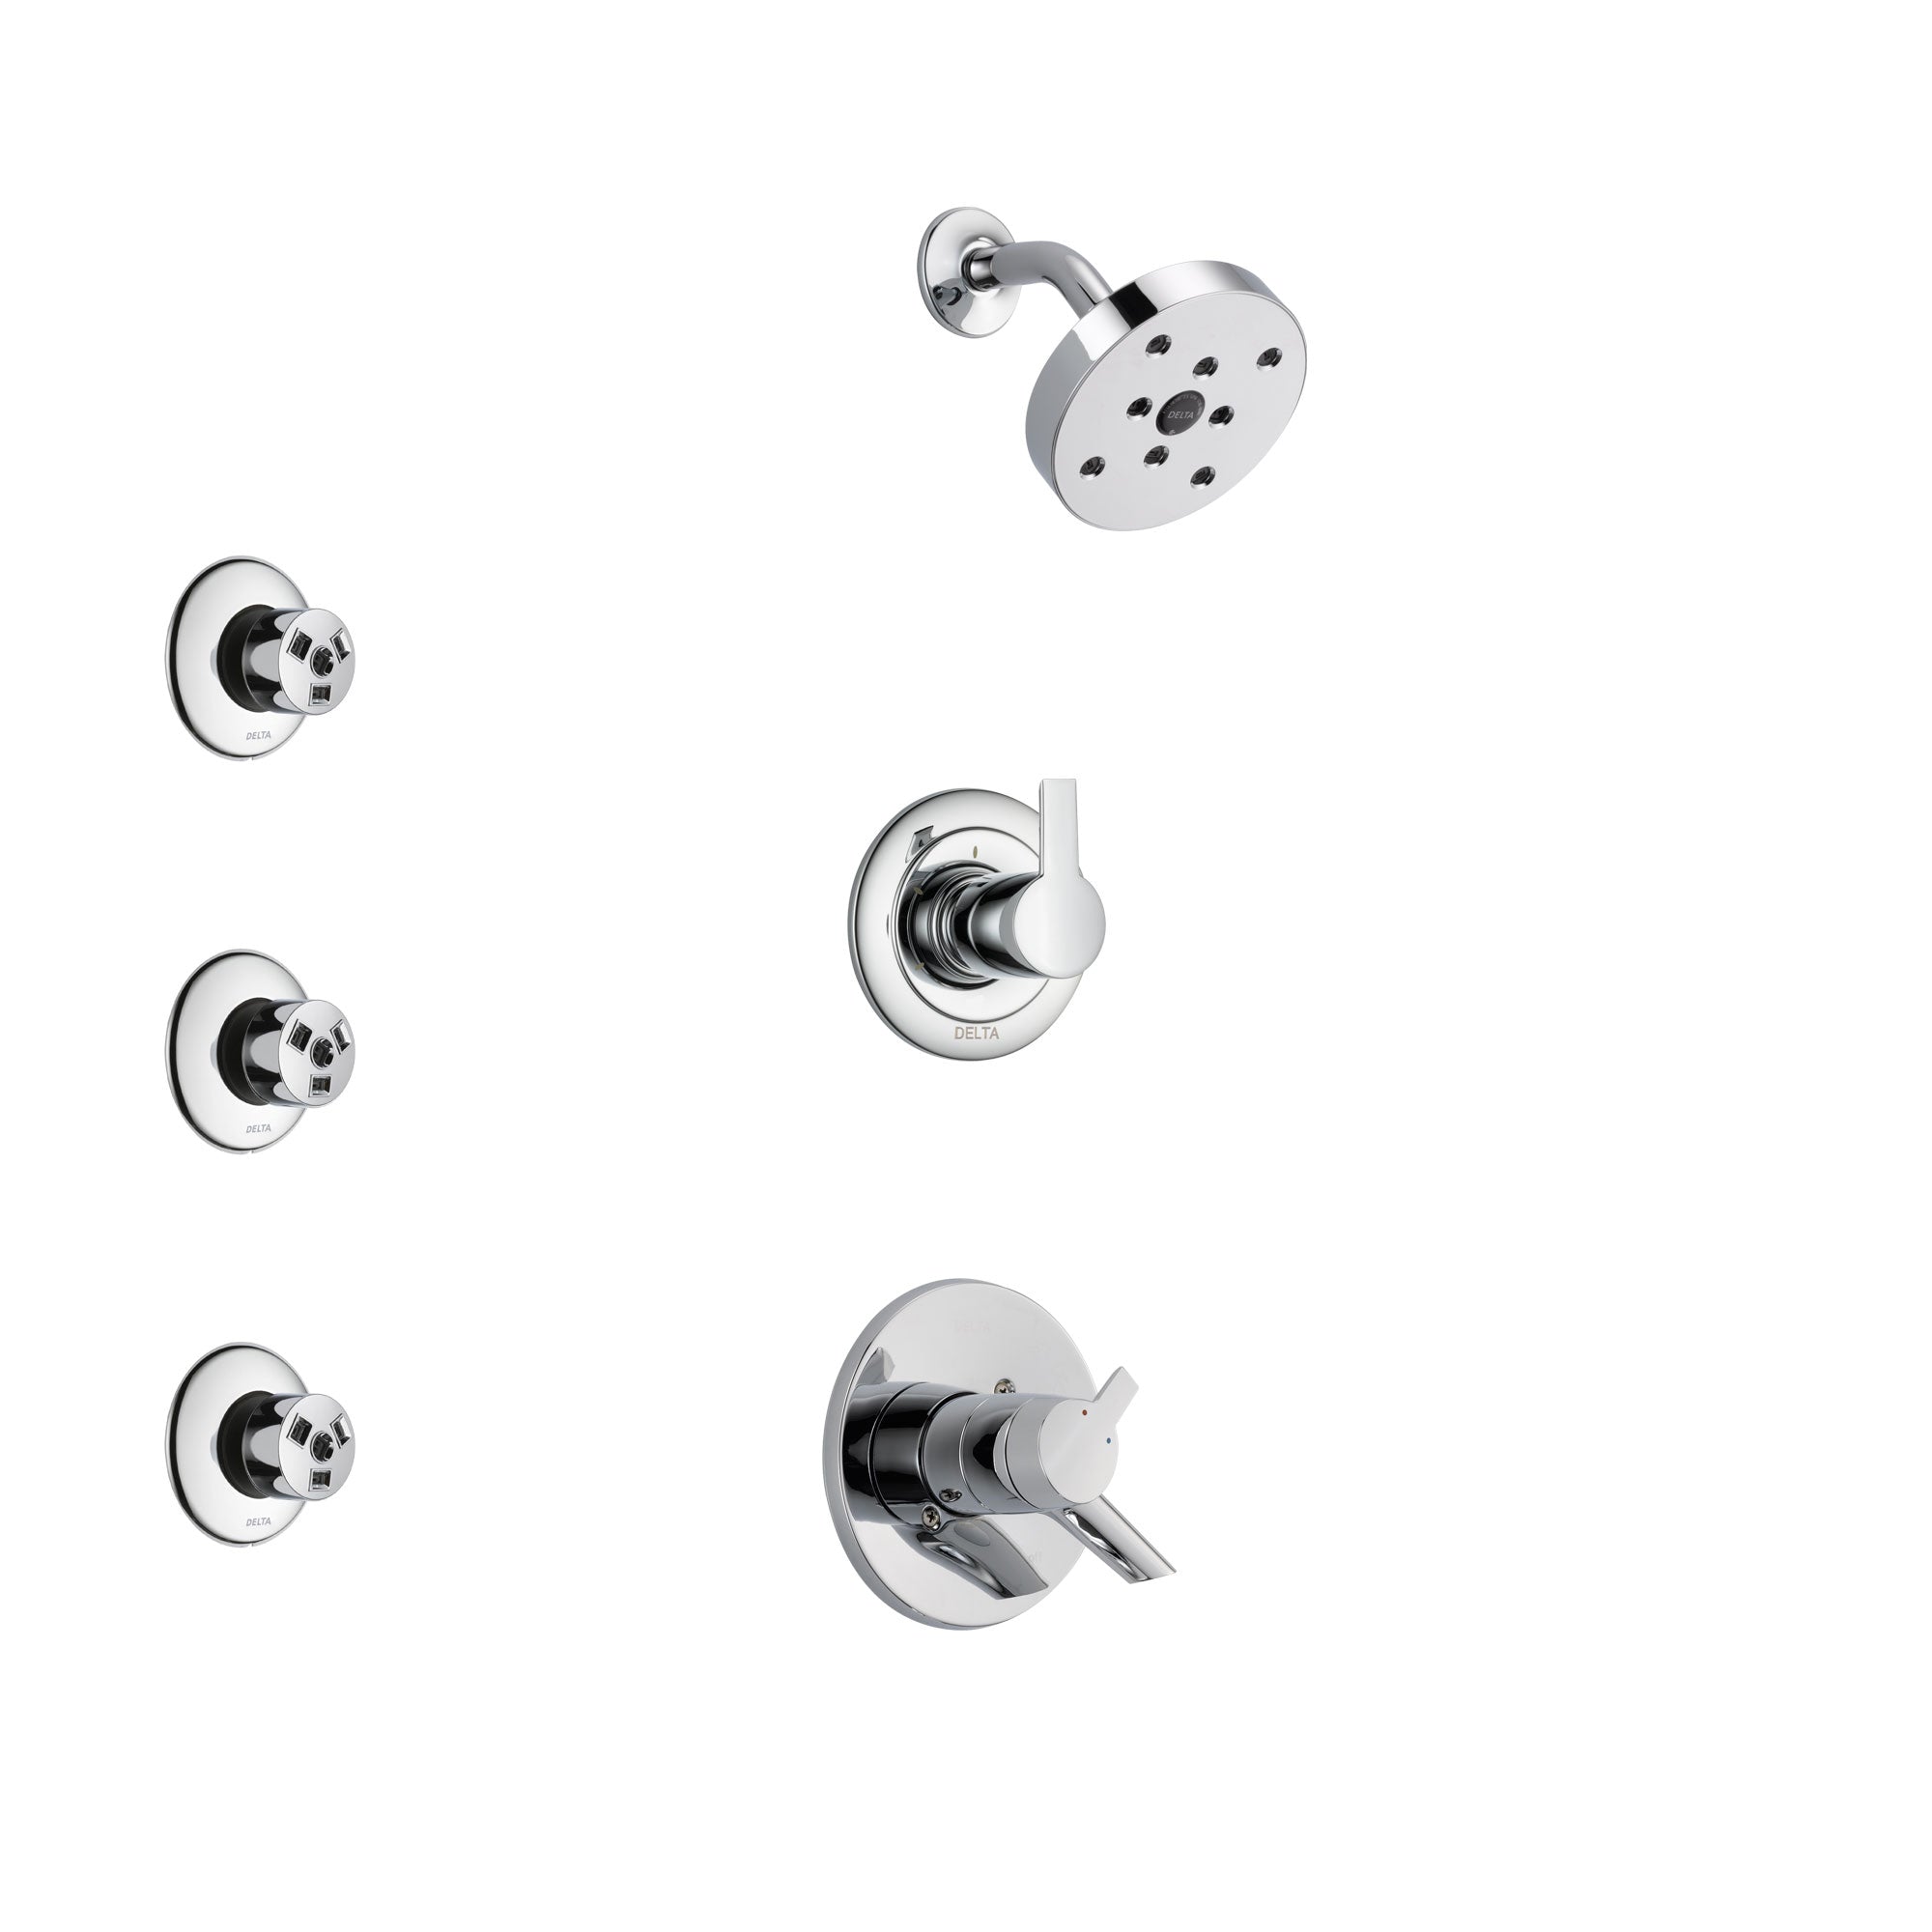 Delta Compel Chrome Finish Shower System with Dual Control Handle, 3-Setting Diverter, Showerhead, and 3 Body Sprays SS172612